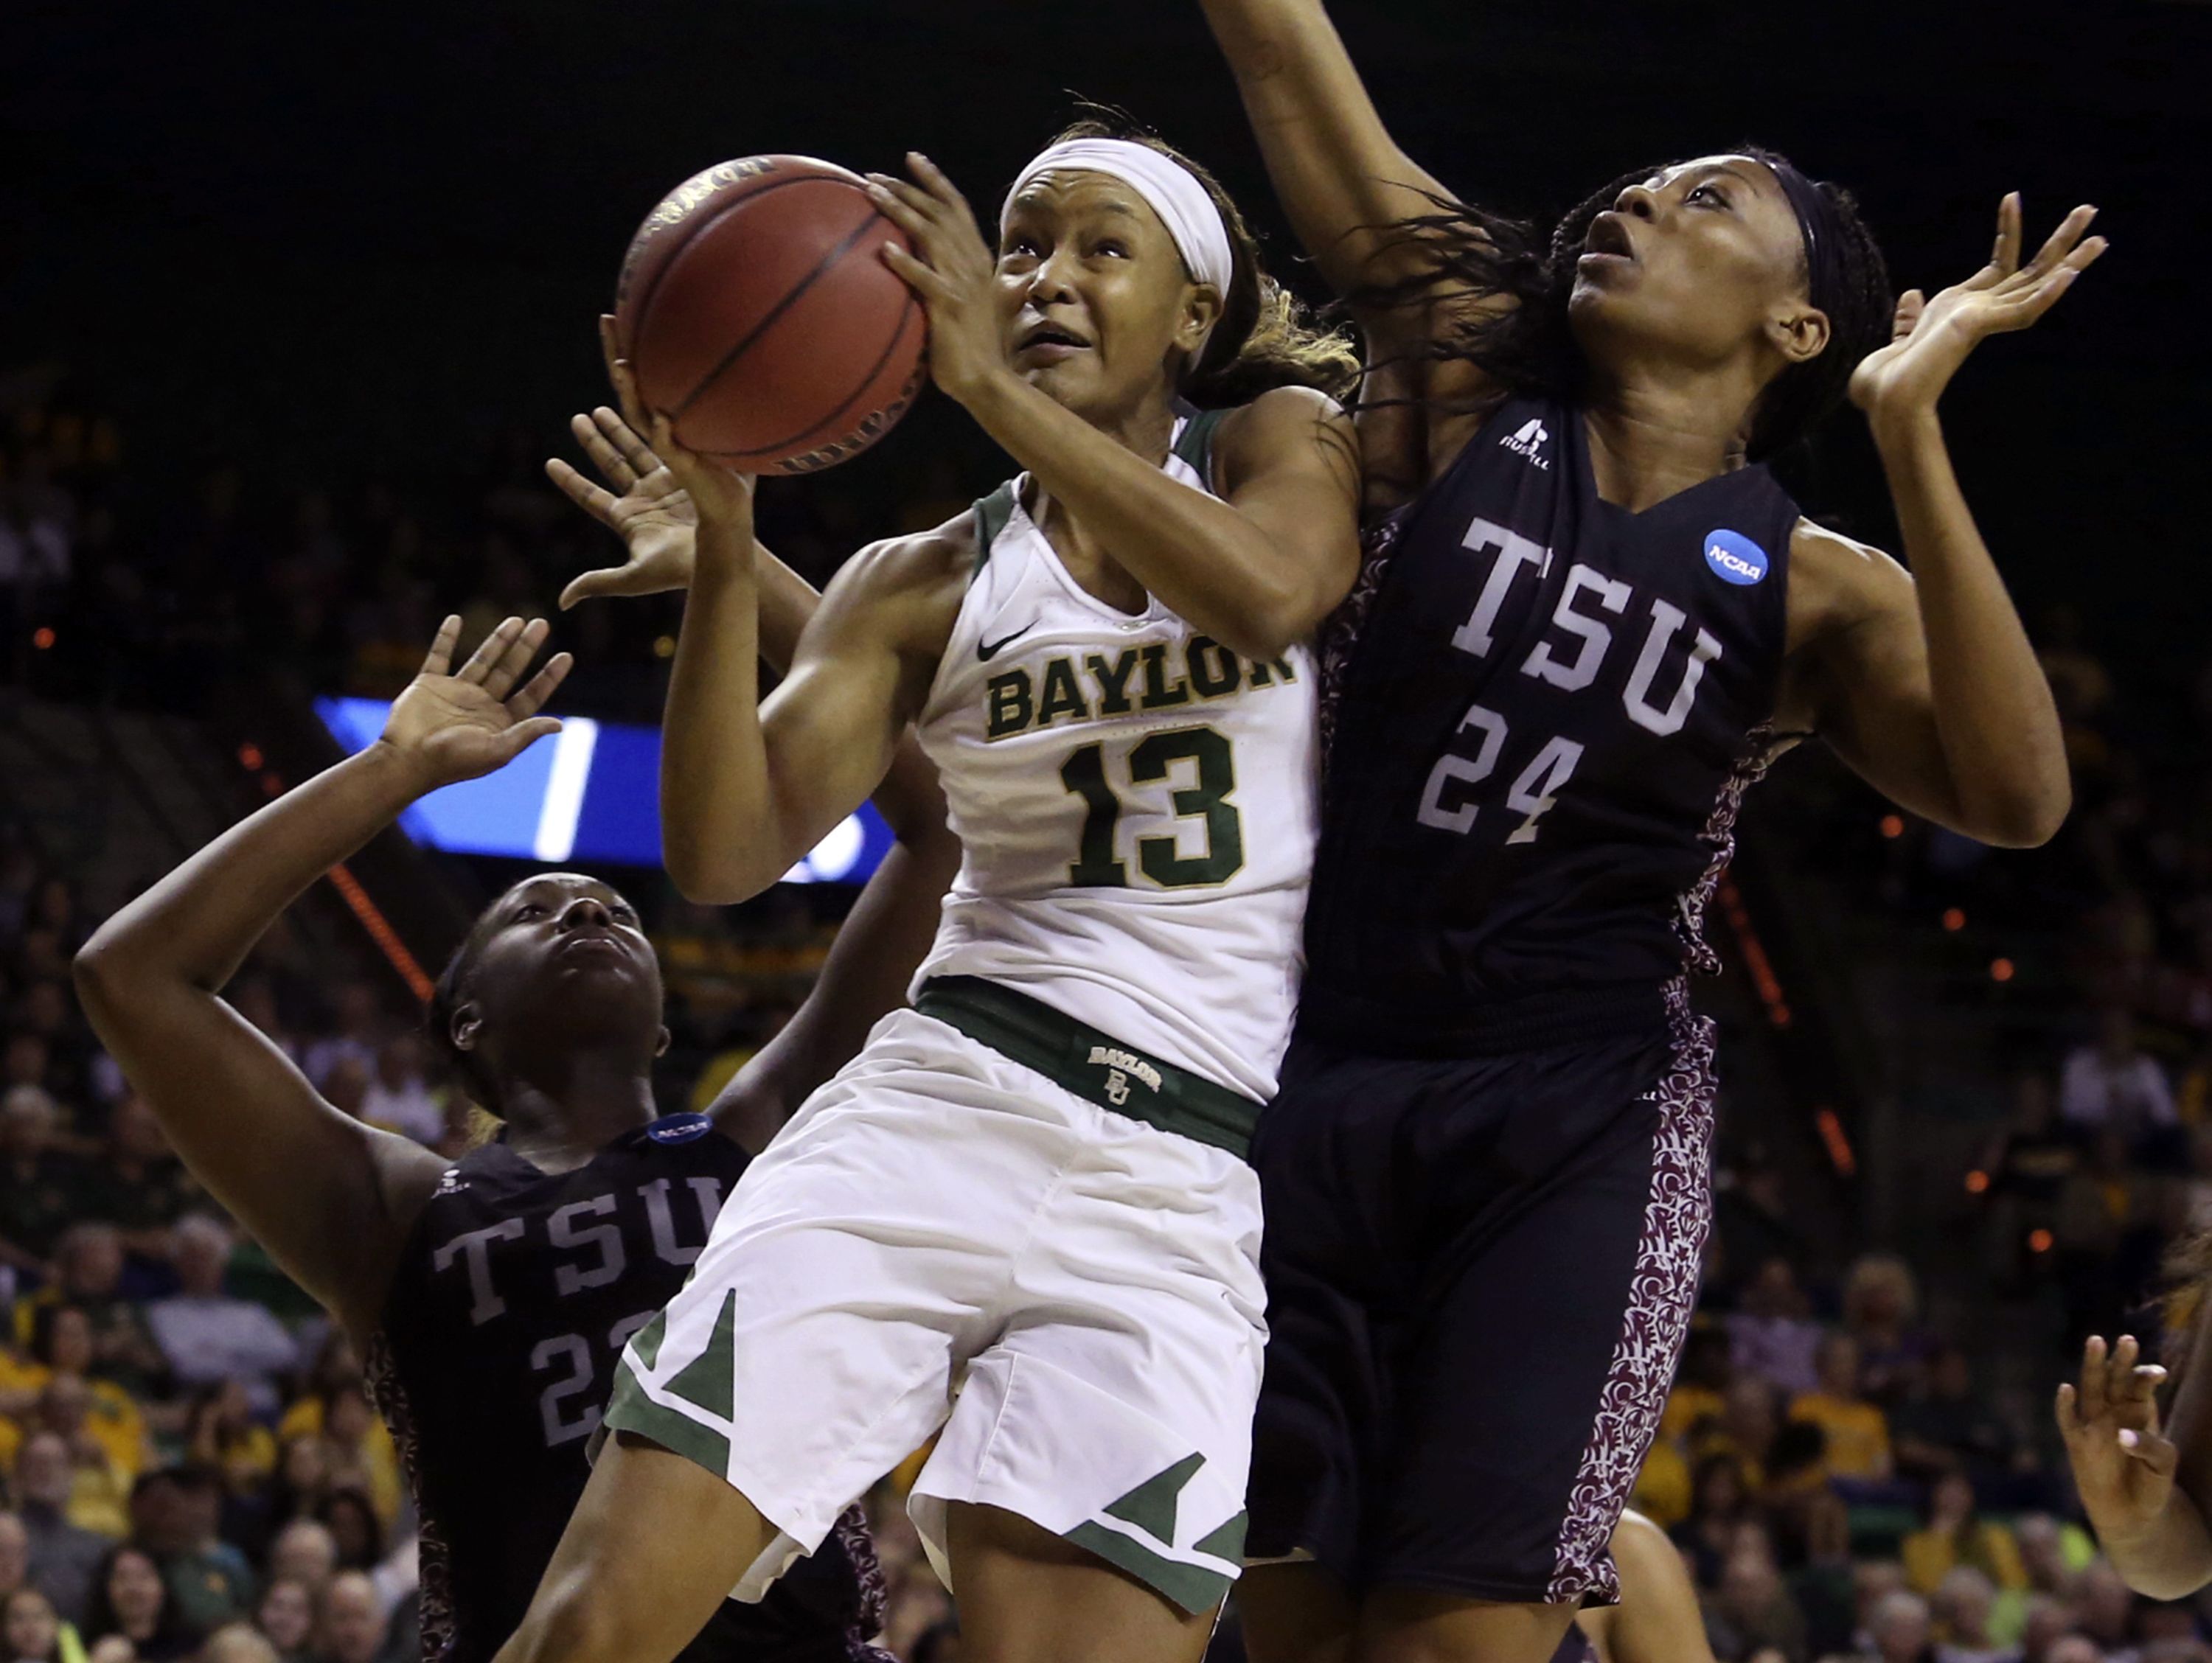 Baylor women set NCAA tournament record with 89point defeat of Texas